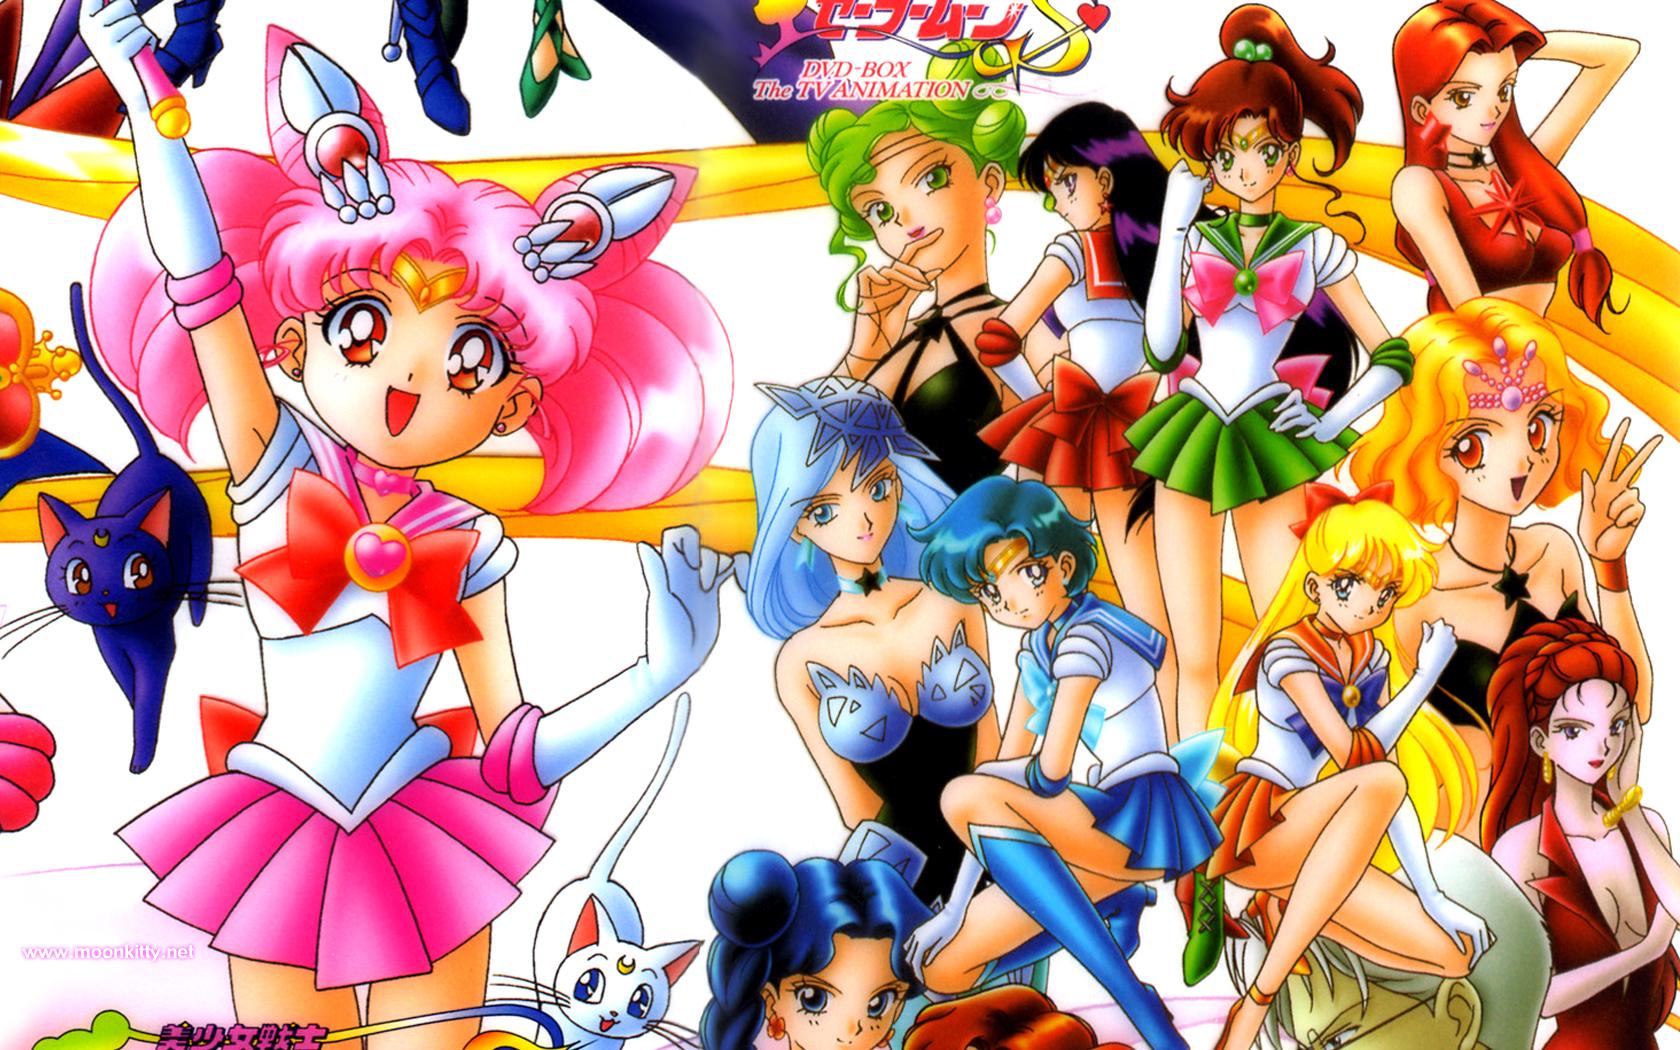 1680 x 1050 · jpeg - moonkitty: Sailor Moon Wallpapers Widescreen Page 16